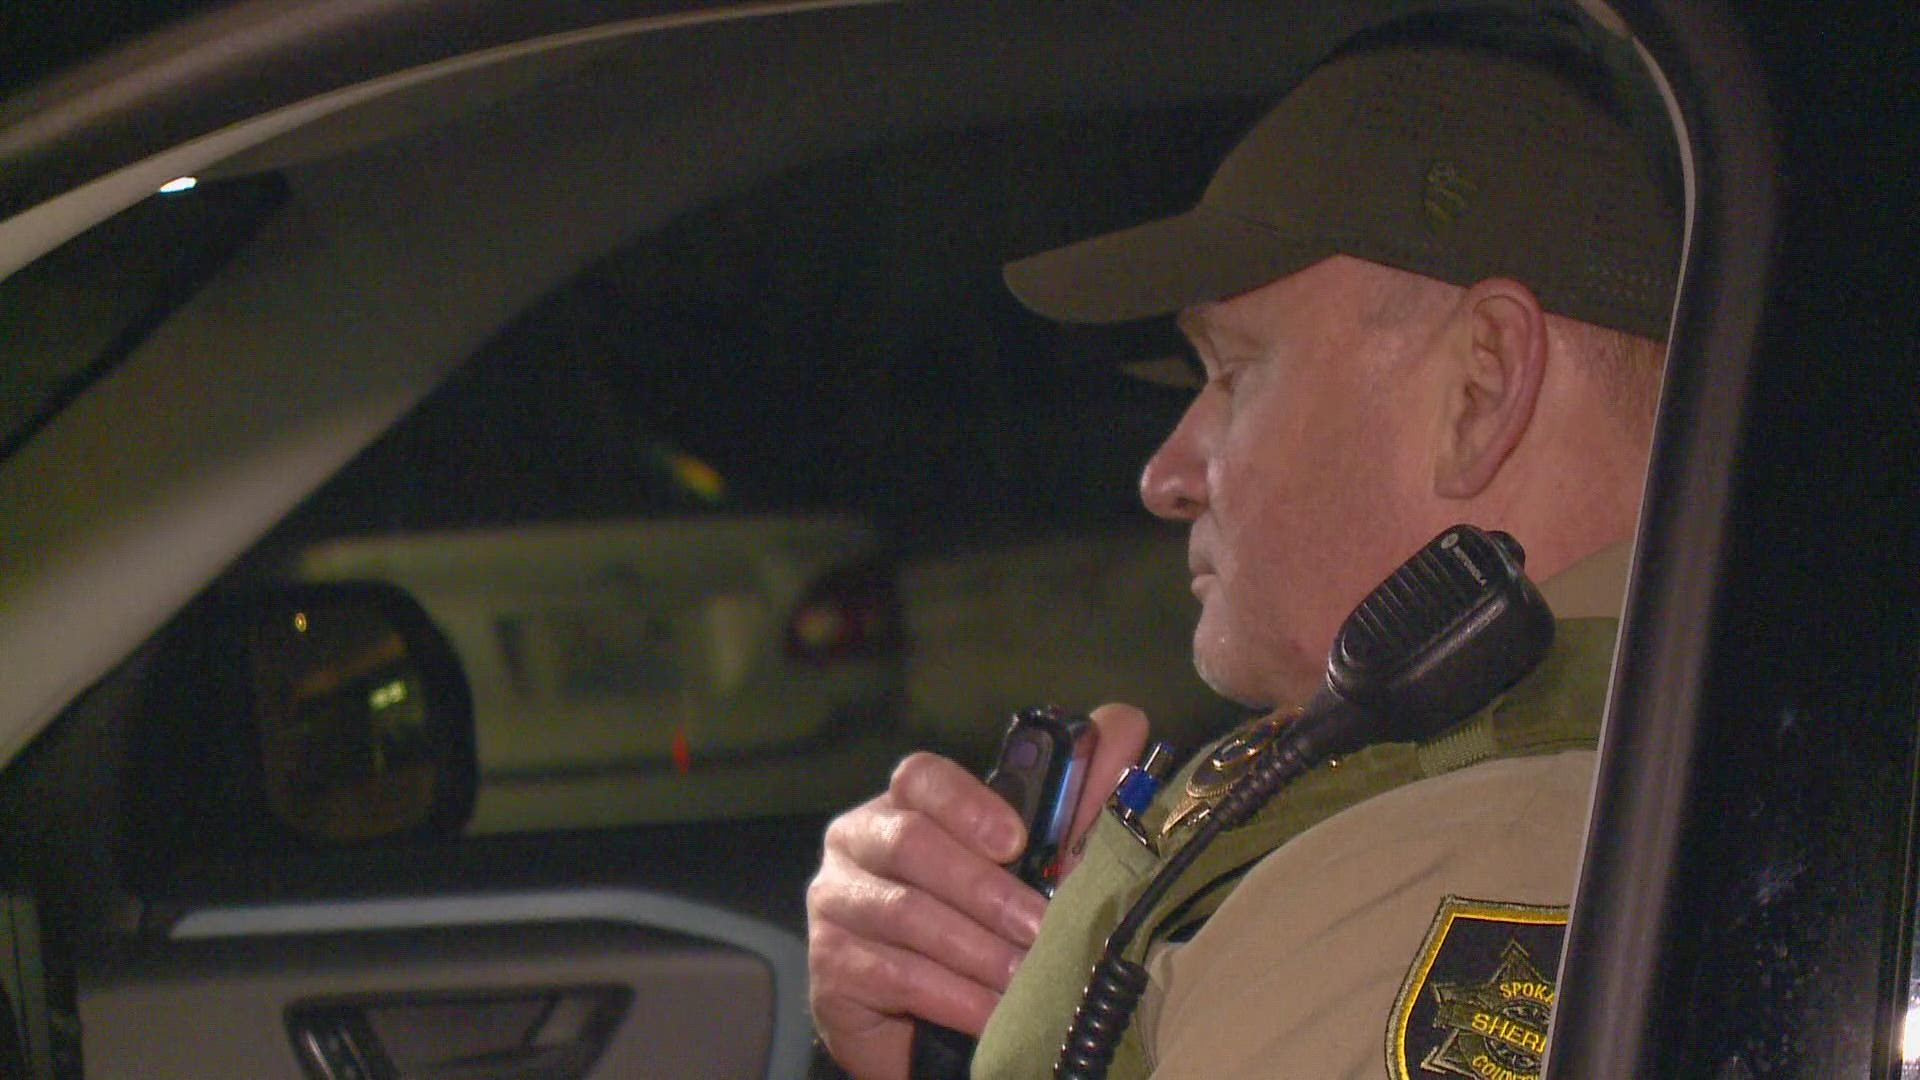 After one last night out on patrol, Spokane County Sheriff Ozzie Knezovich provides a heartfelt goodbye to the sheriff's office and the people of Spokane County.